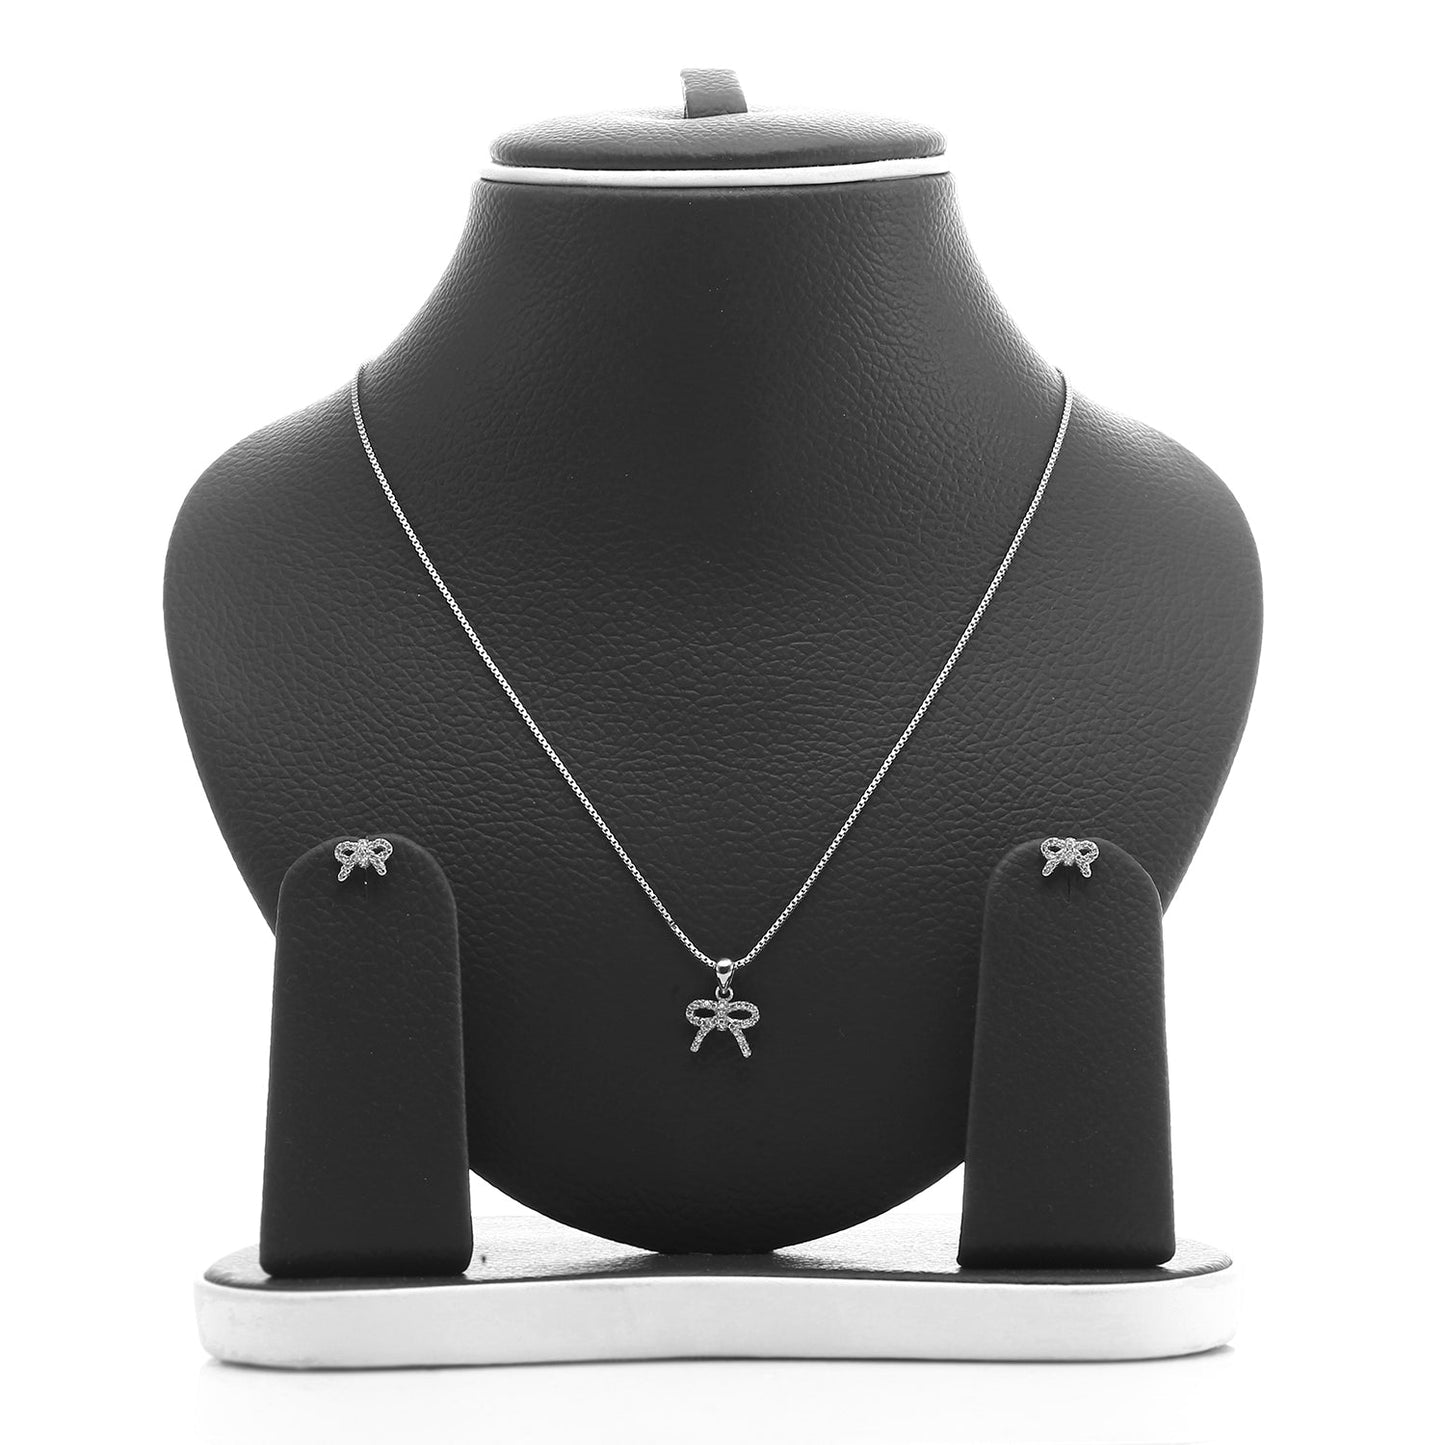 Sparkling Bow Pendant Necklace and Earrings Set - ARJW1010RD ARCADIO